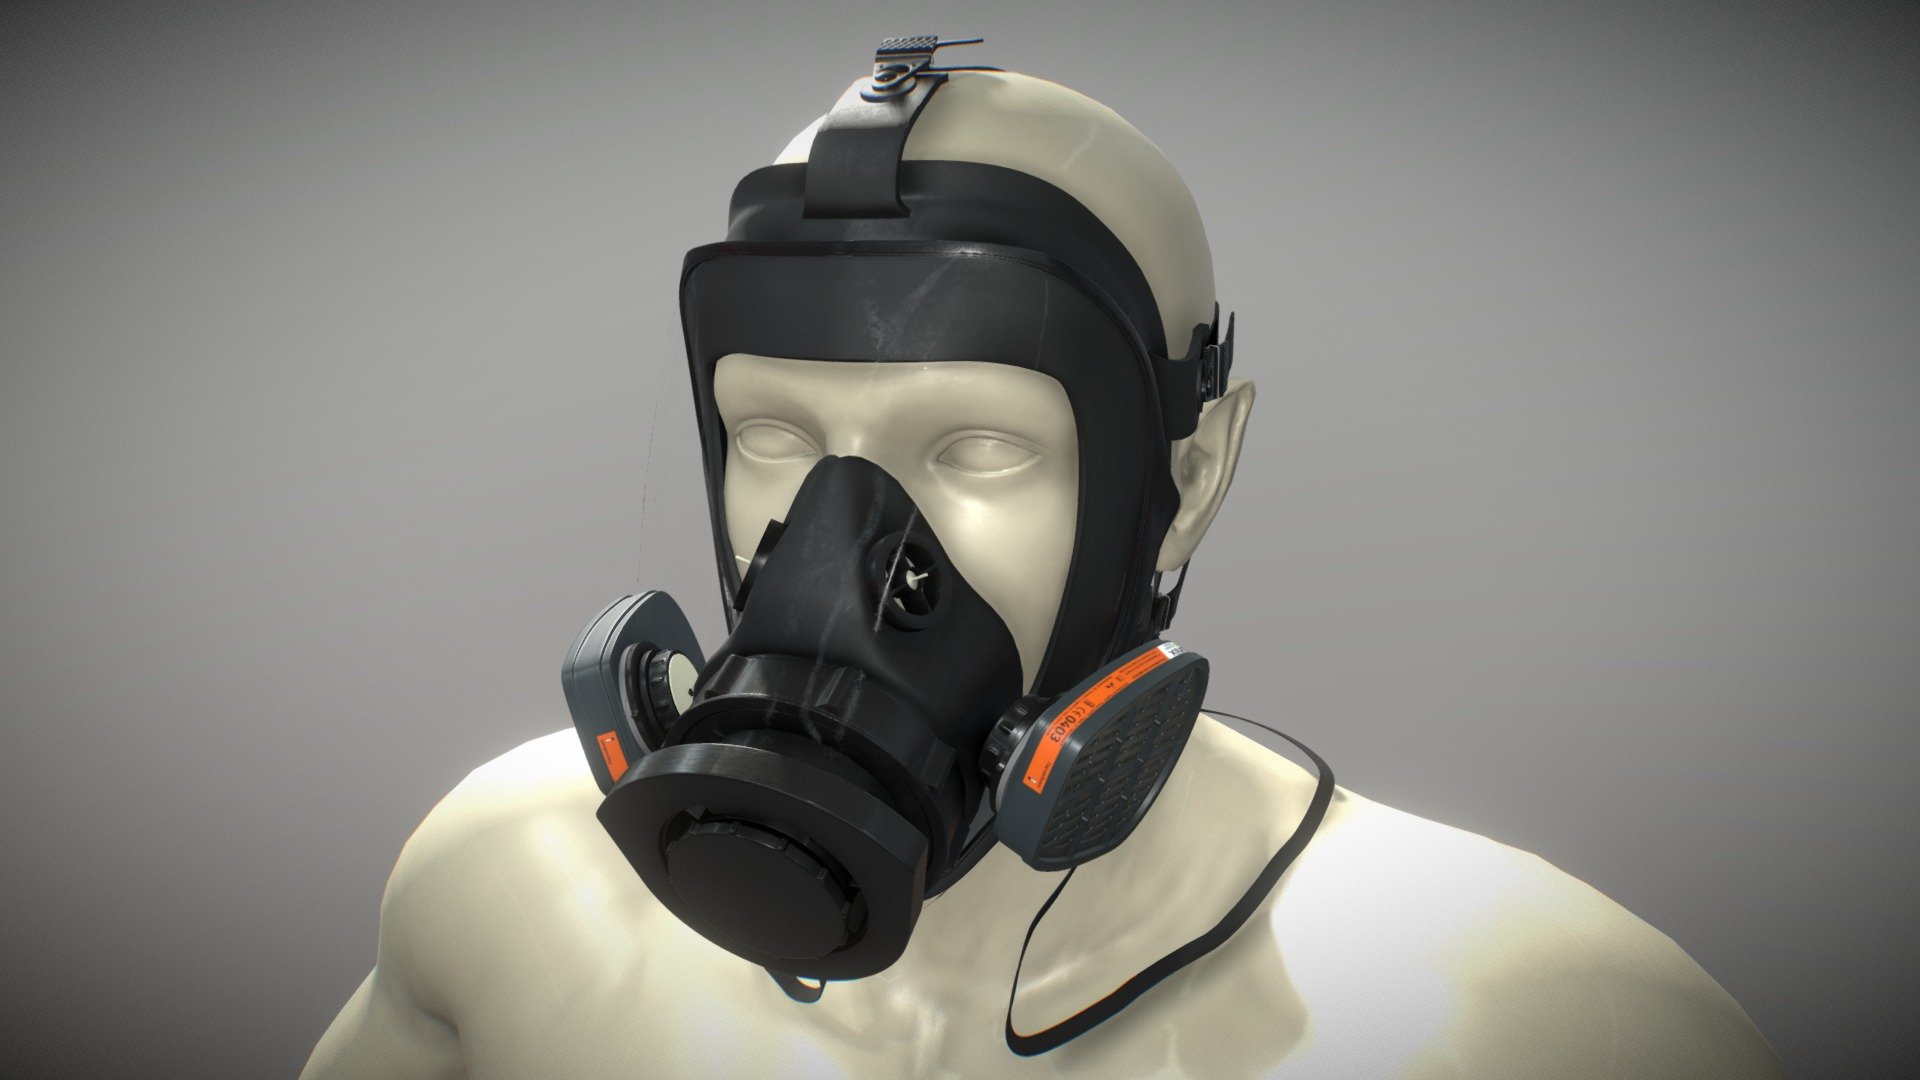 Unix 5000 is russian industrial gasmask.
Developed and manufactured by JSC &ldquo;Sorbent